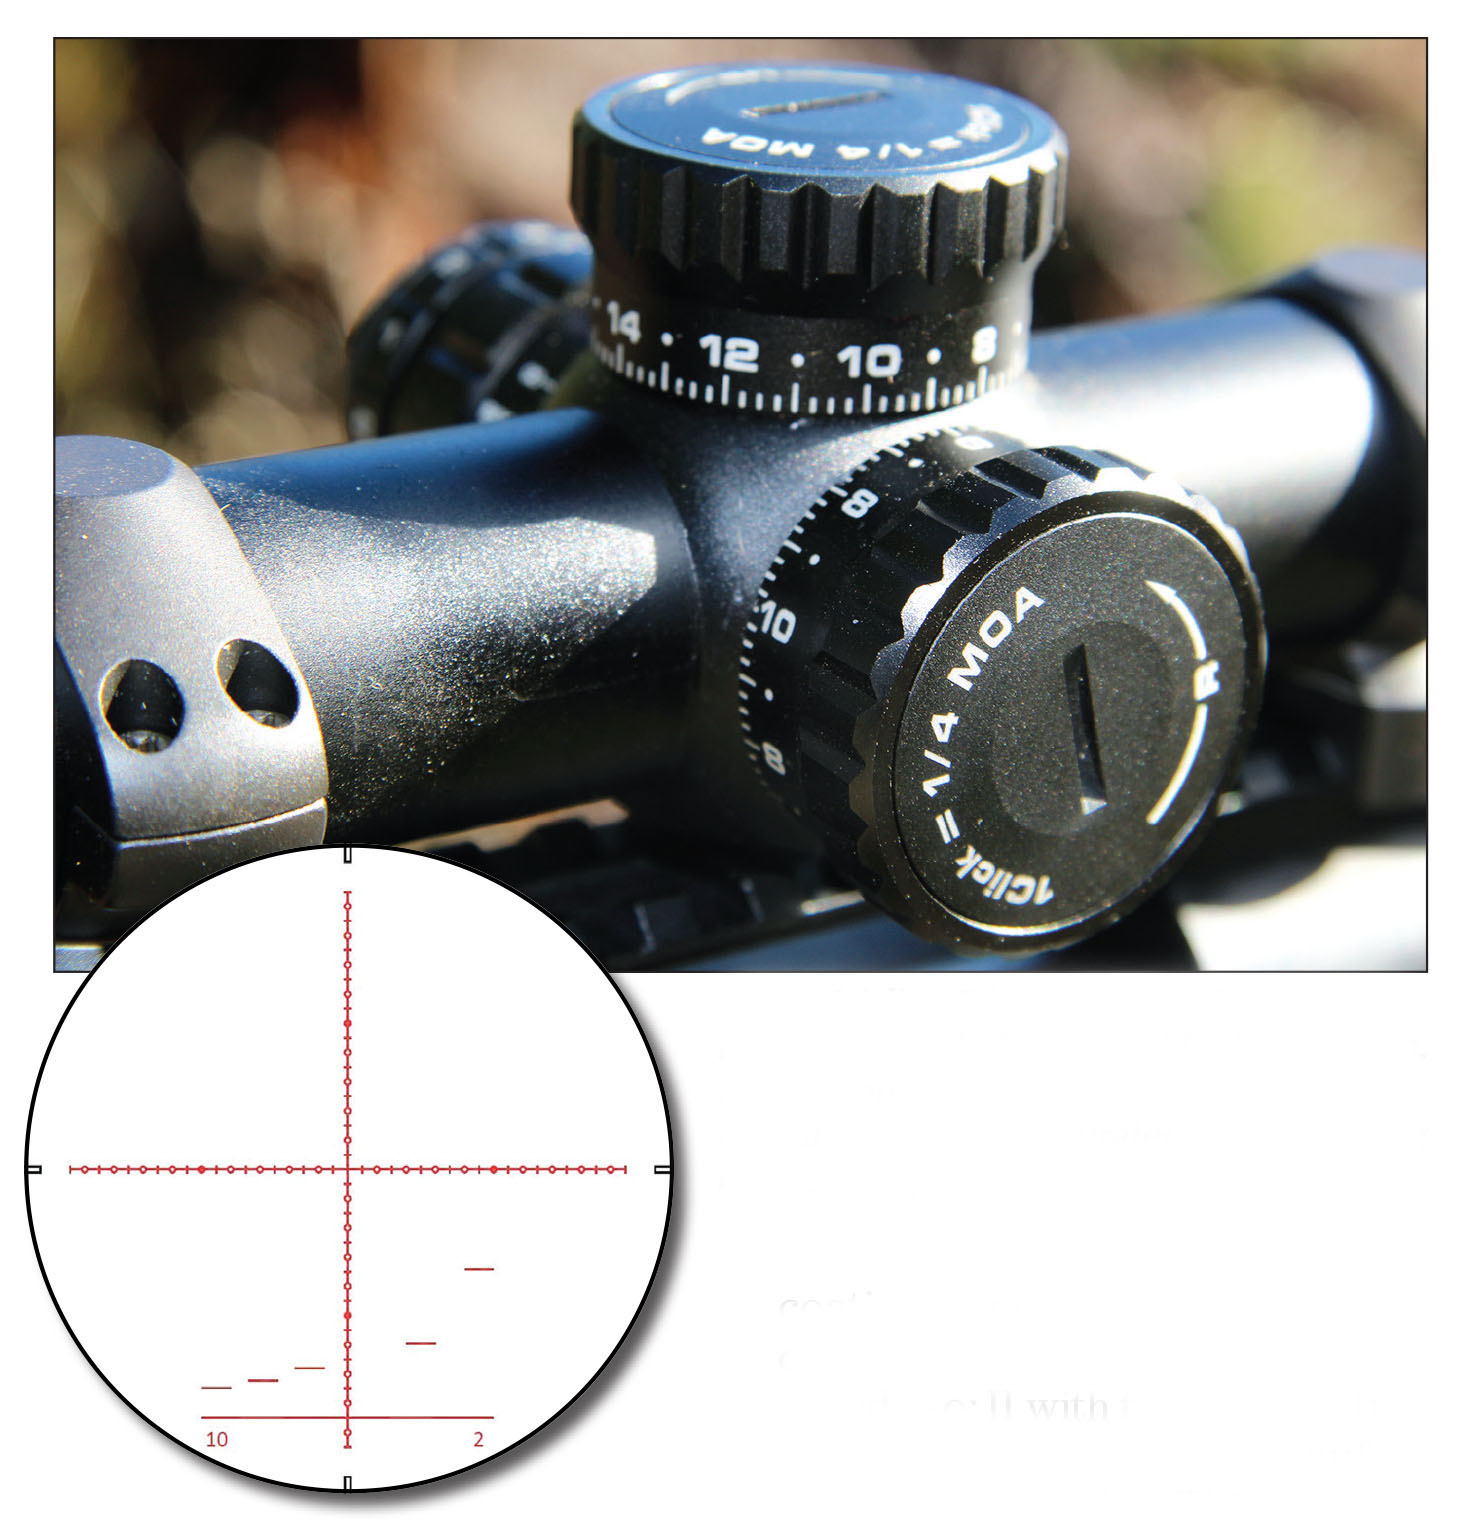 Nikko Stirling Diamond Long Range riflescopes include exposed locking turrets. Patrick found them somewhat loose, but nonetheless, they offered accurate tracking between large corrections.